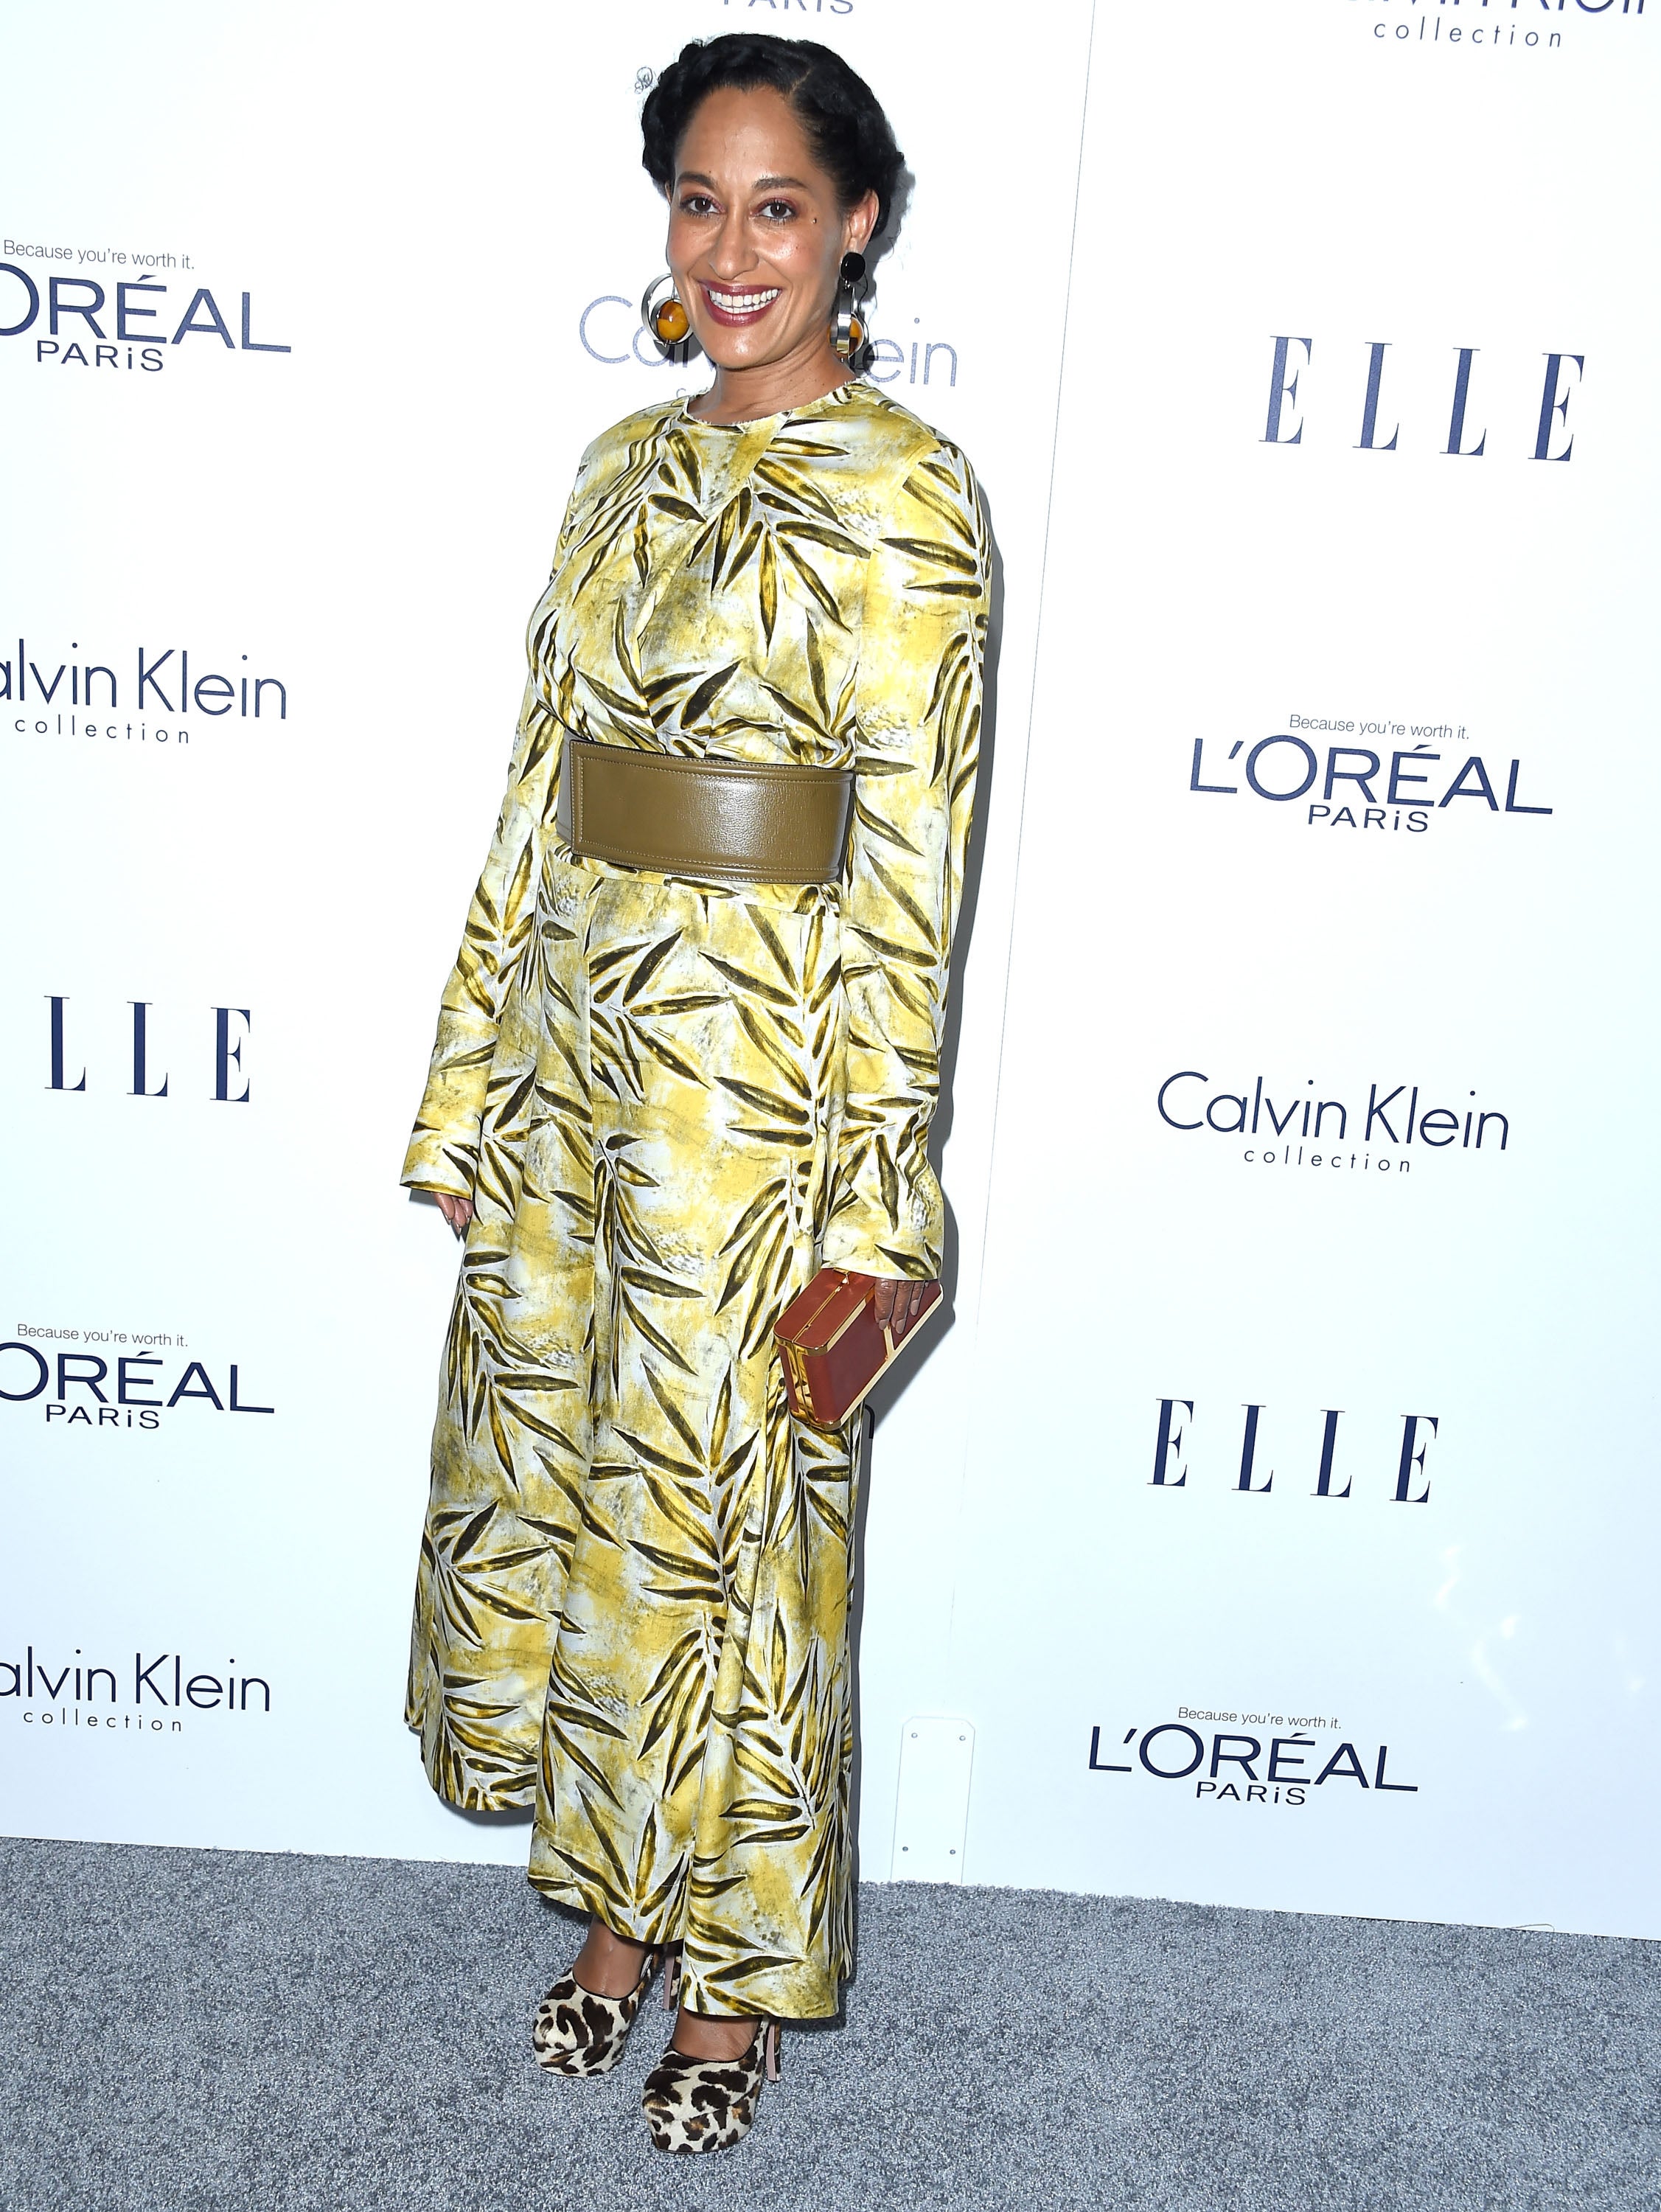 We Can't Get Over How Fierce Tracee Ellis Ross' Colorful Shoe Game Is!
